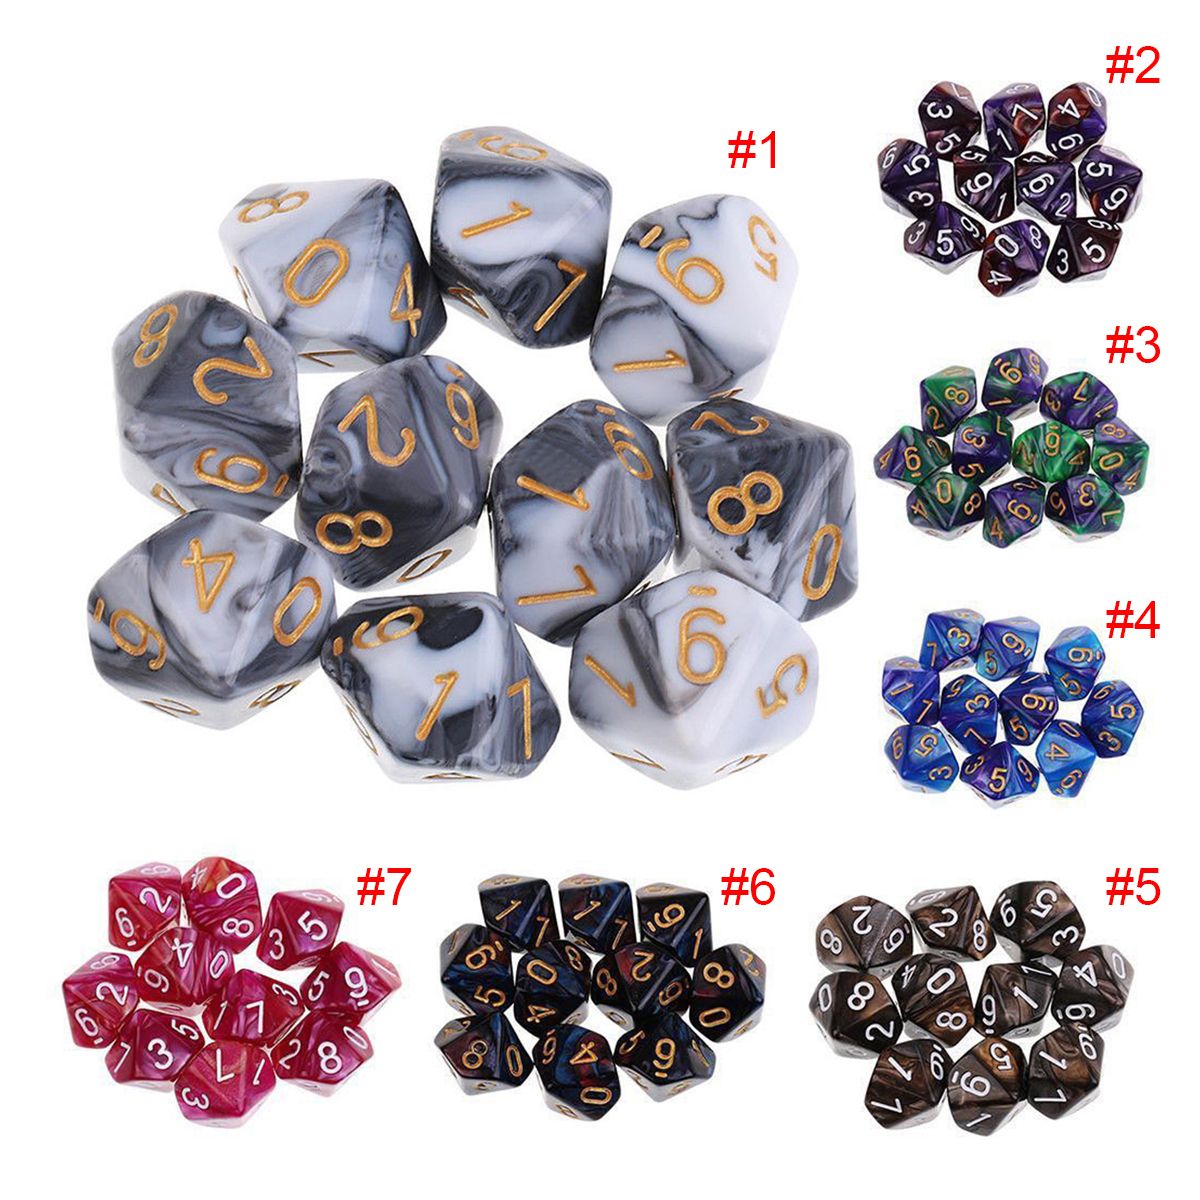 10pcs-10-Sided-Dice-D10-Polyhedral-Dices-Table-Games-EDC-Gadget-Playing-Multisided-Dice-Table-Games-1294834